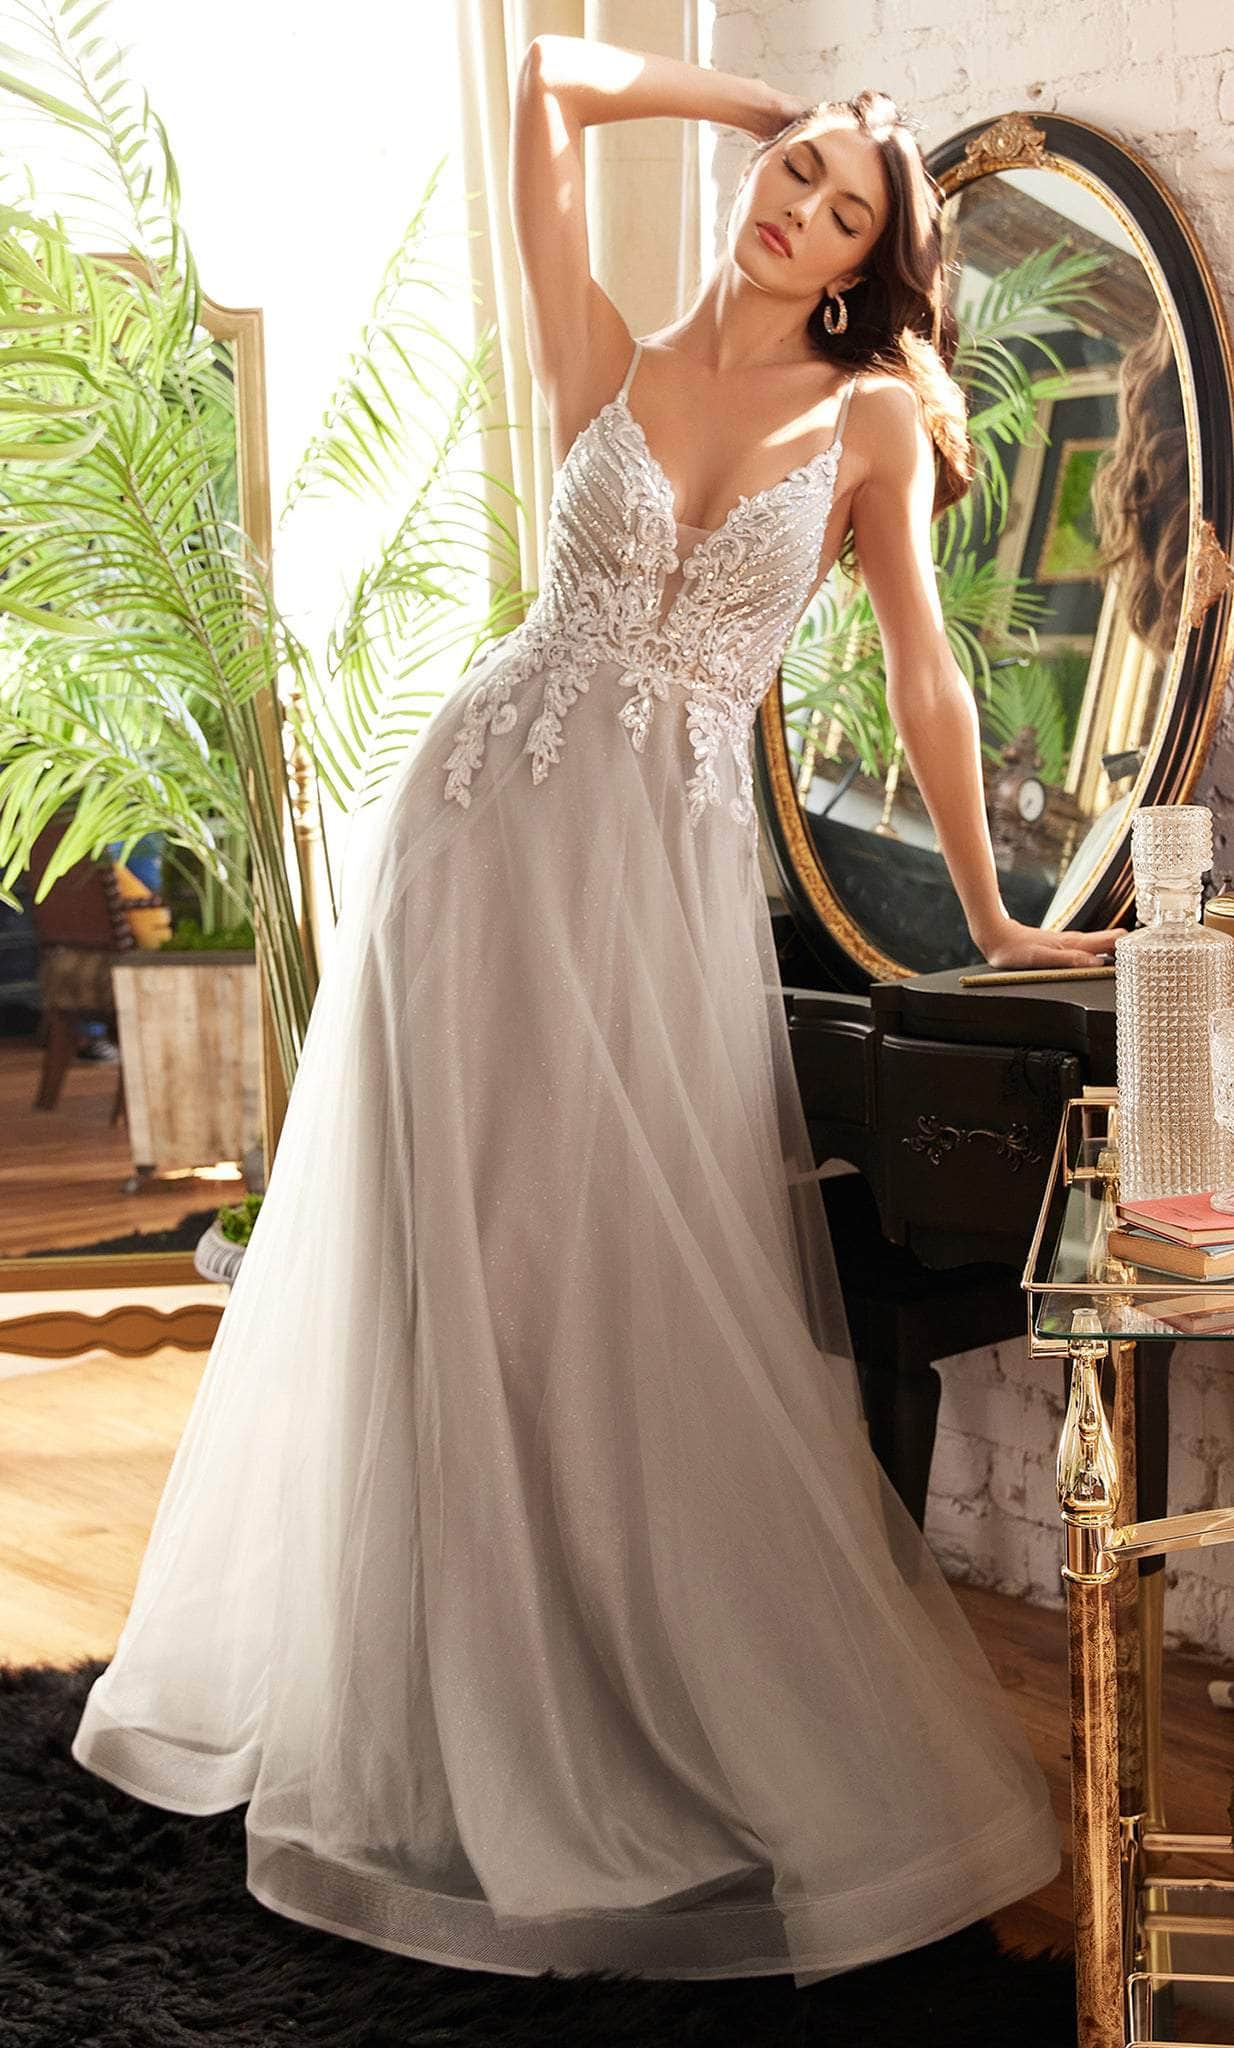 Ladivine CD874 - Tulle Gown